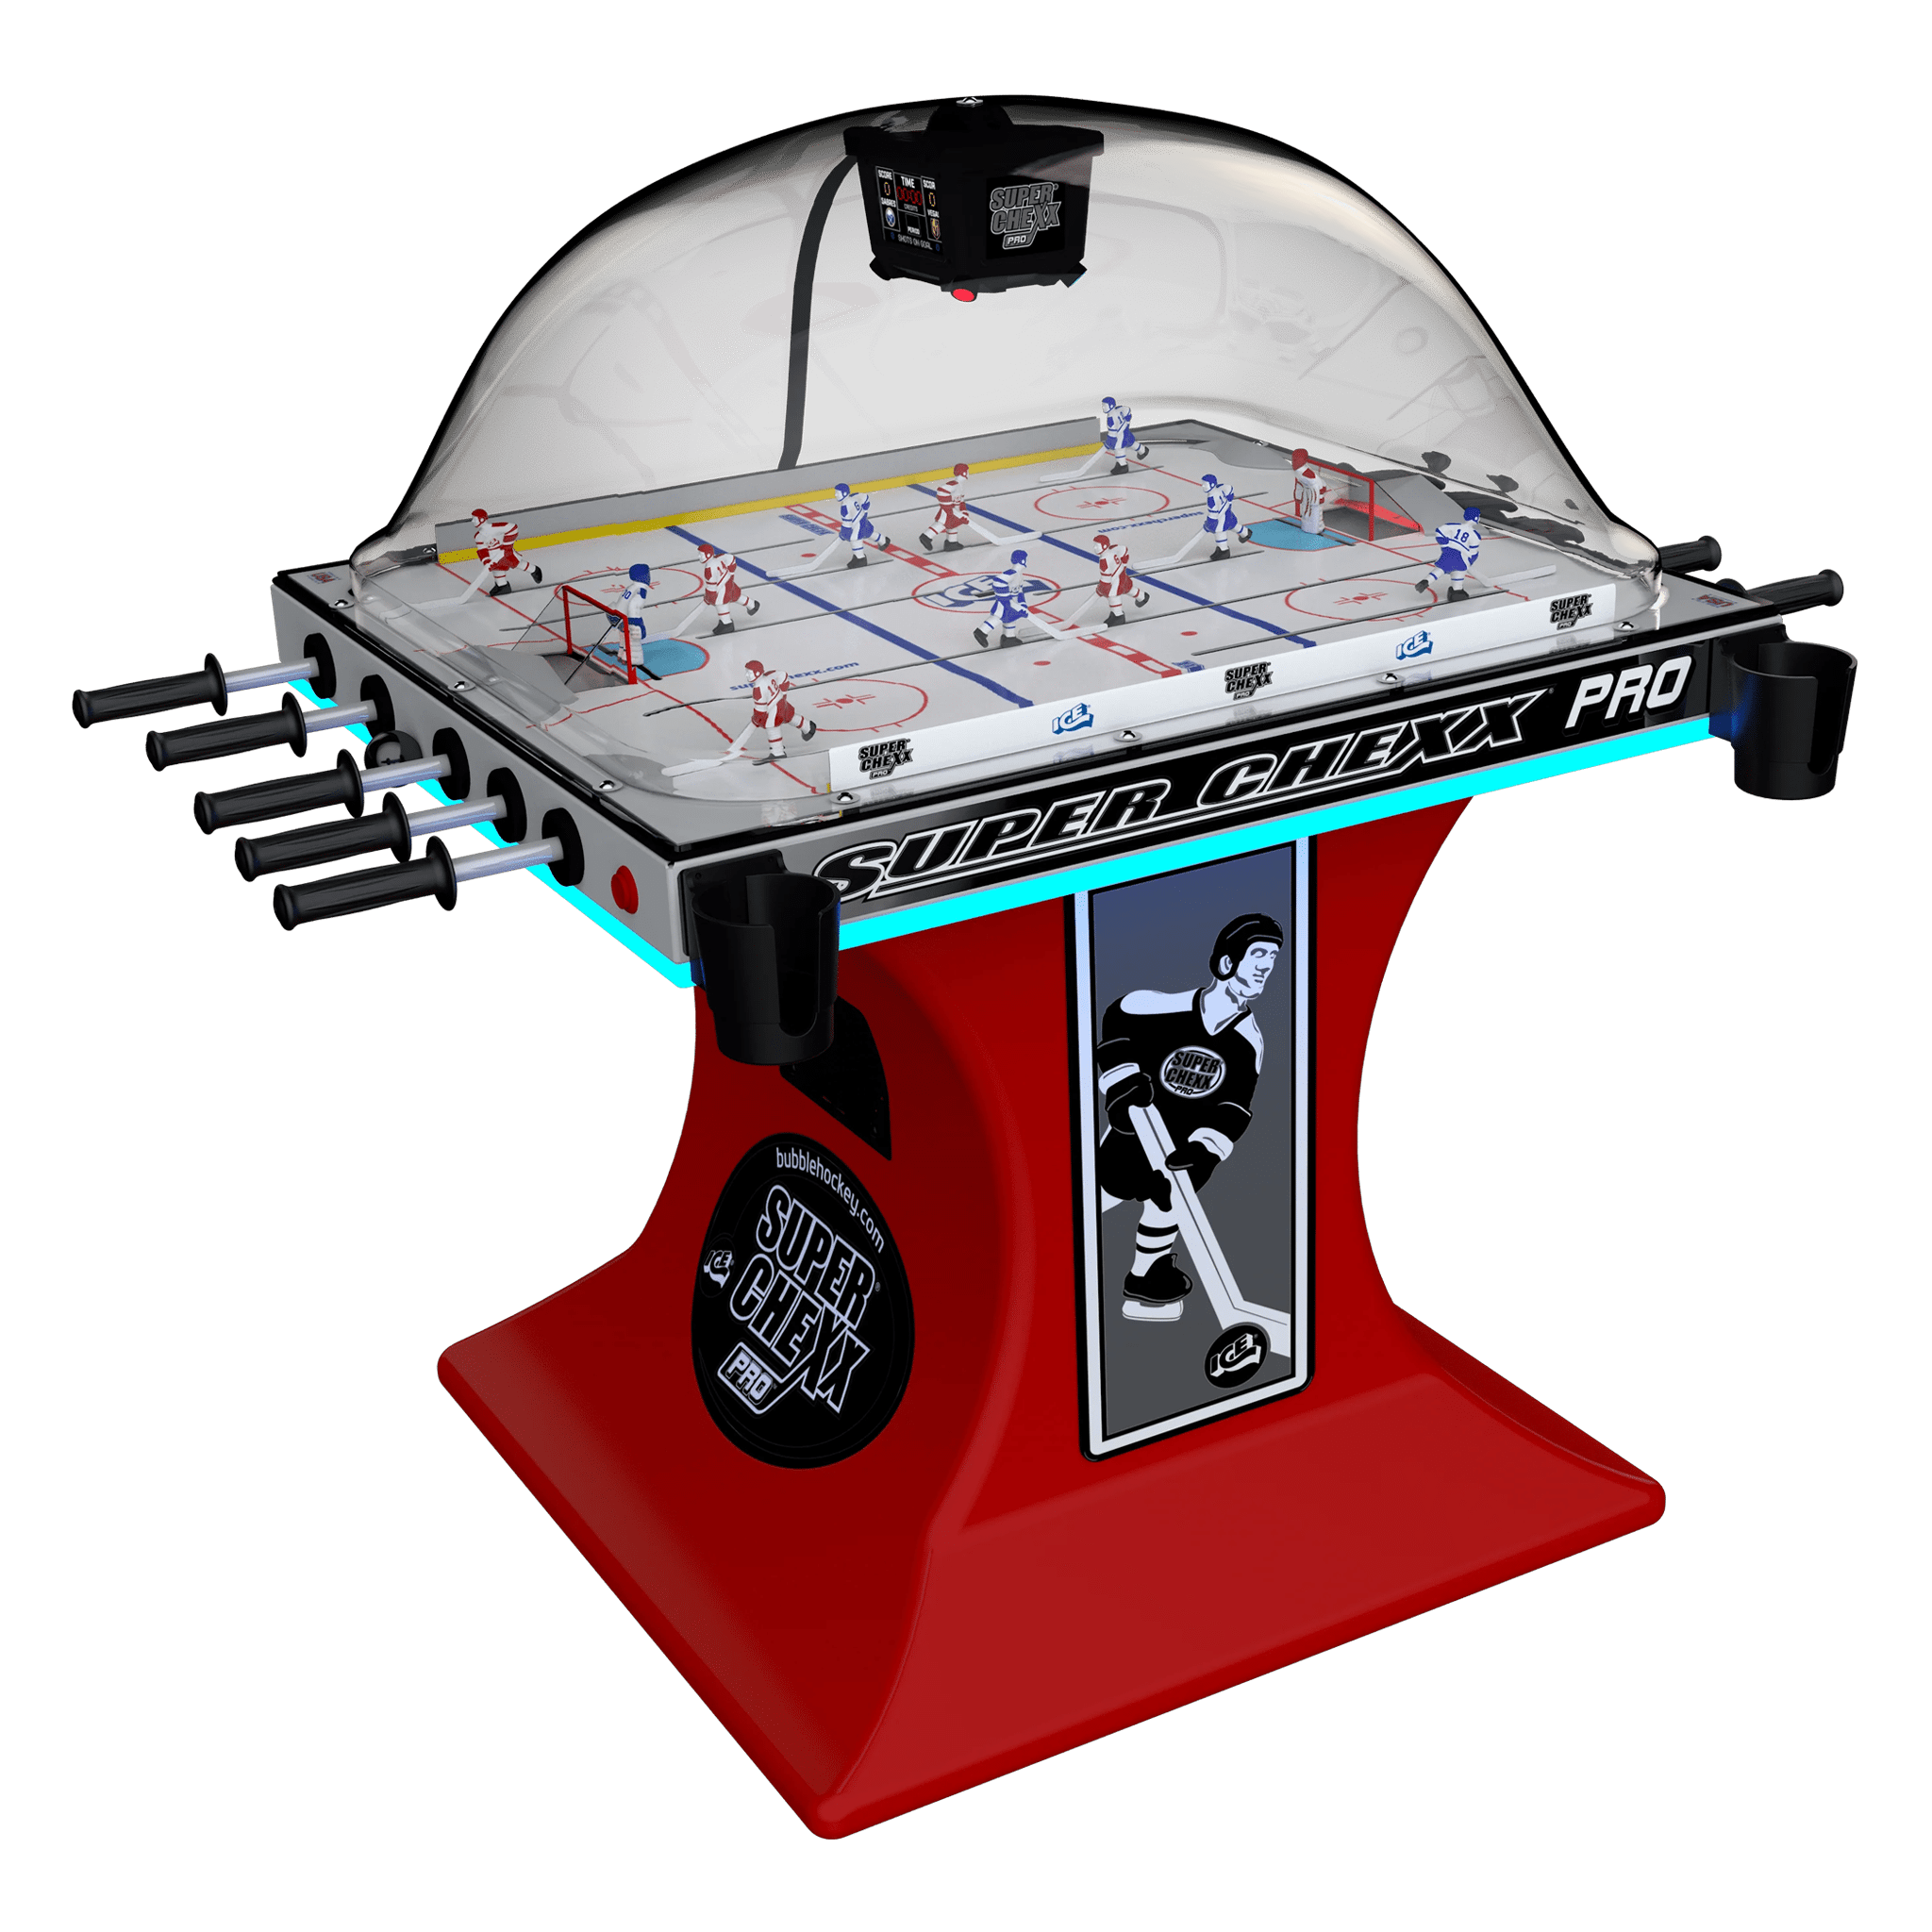 Super Chexx Pro Bubble Hockey Standard Edition Red Base with Cup Holders and LEDs